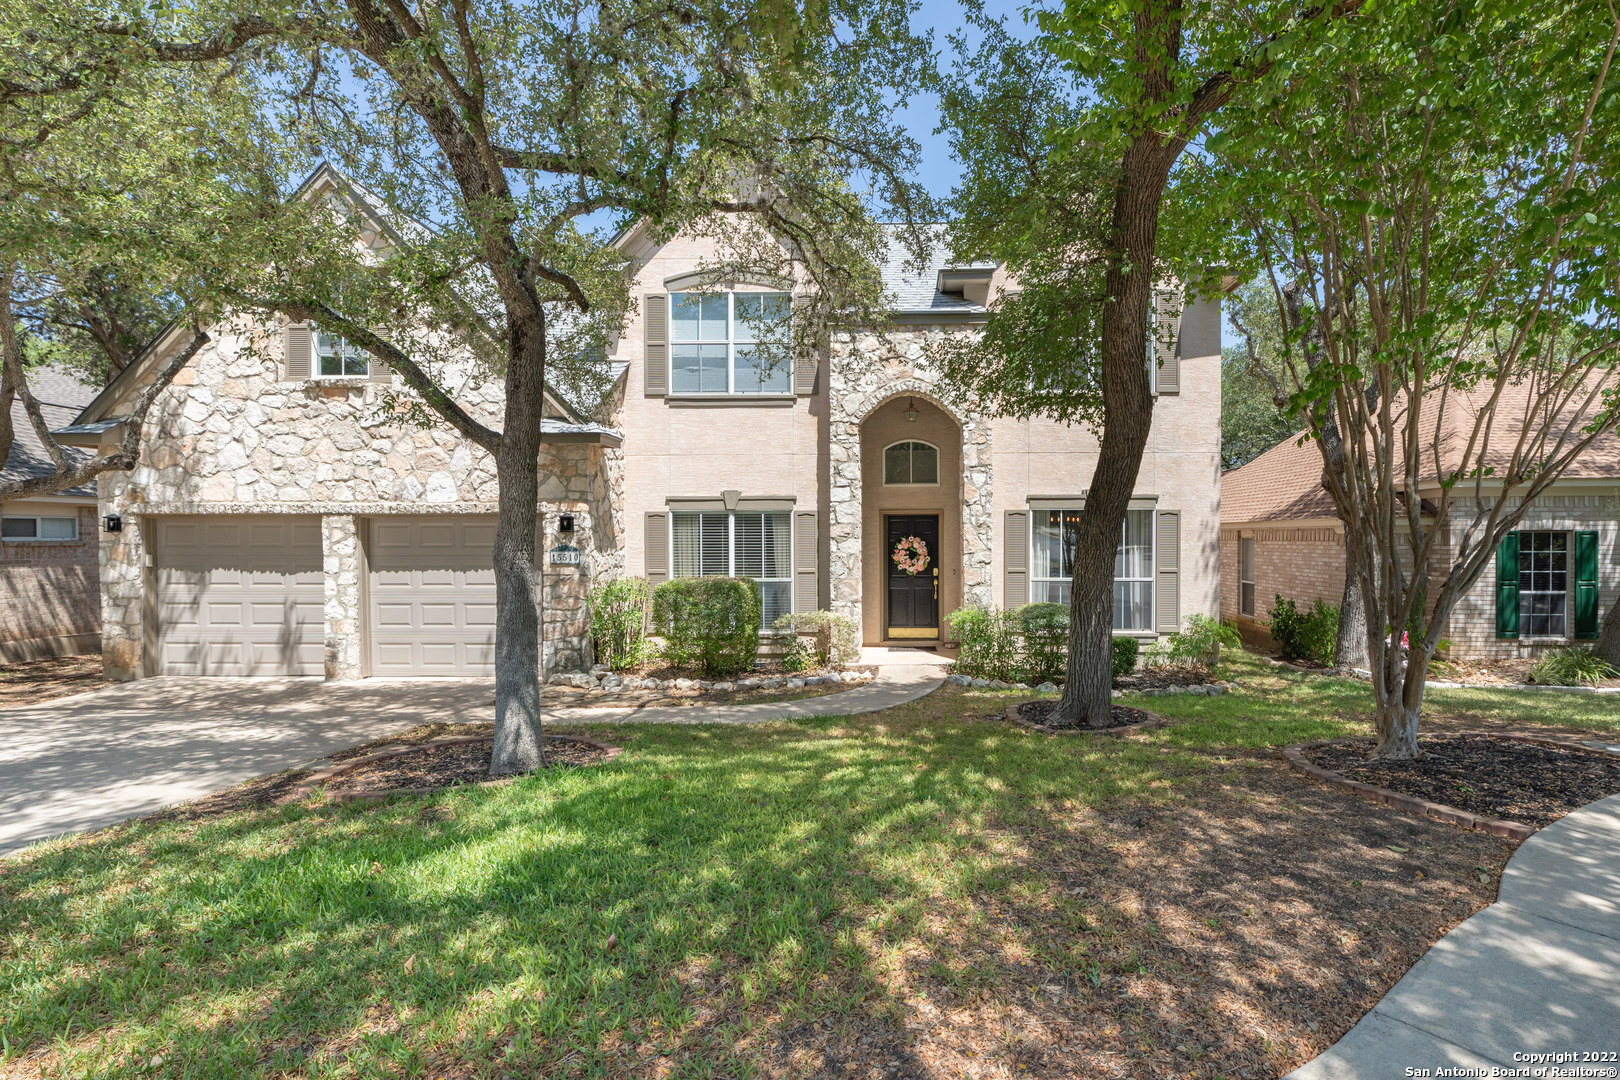 Welcome to your new custom 3 bedroom and 2.5-bath home in this prestigious gated Deerfield neighborhood. Great NEISD schools. Minutes from 281, 1604, and shopping. This home is on a scenic greenbelt. The main level features an open floor plan with tile and wood floors throughout and large windows for natural light. There are two living spaces on this level, with the family room featuring a fireplace and outside access to the quiet, wooded backyard. The gourmet kitchen has beautiful granite countertops, stainless steel appliances, plenty of oak cabinet space, and built-in microwave, oven, and cooktop. The large master suite and master bath are downstairs, with dual vanities, a separate garden tub and shower, and two walk-in closets. The master bedroom has new paint and new wood floors, and the master bathroom has new paint, for a total of $10,000 worth of updates.  The second level has two additional bedrooms, a bath with double vanity and shower tub, and a large game room with beautiful wood floors. Your backyard with a large deck and mature oak trees is ideal for entertaining and relaxation. Do not miss out on this remarkable home.